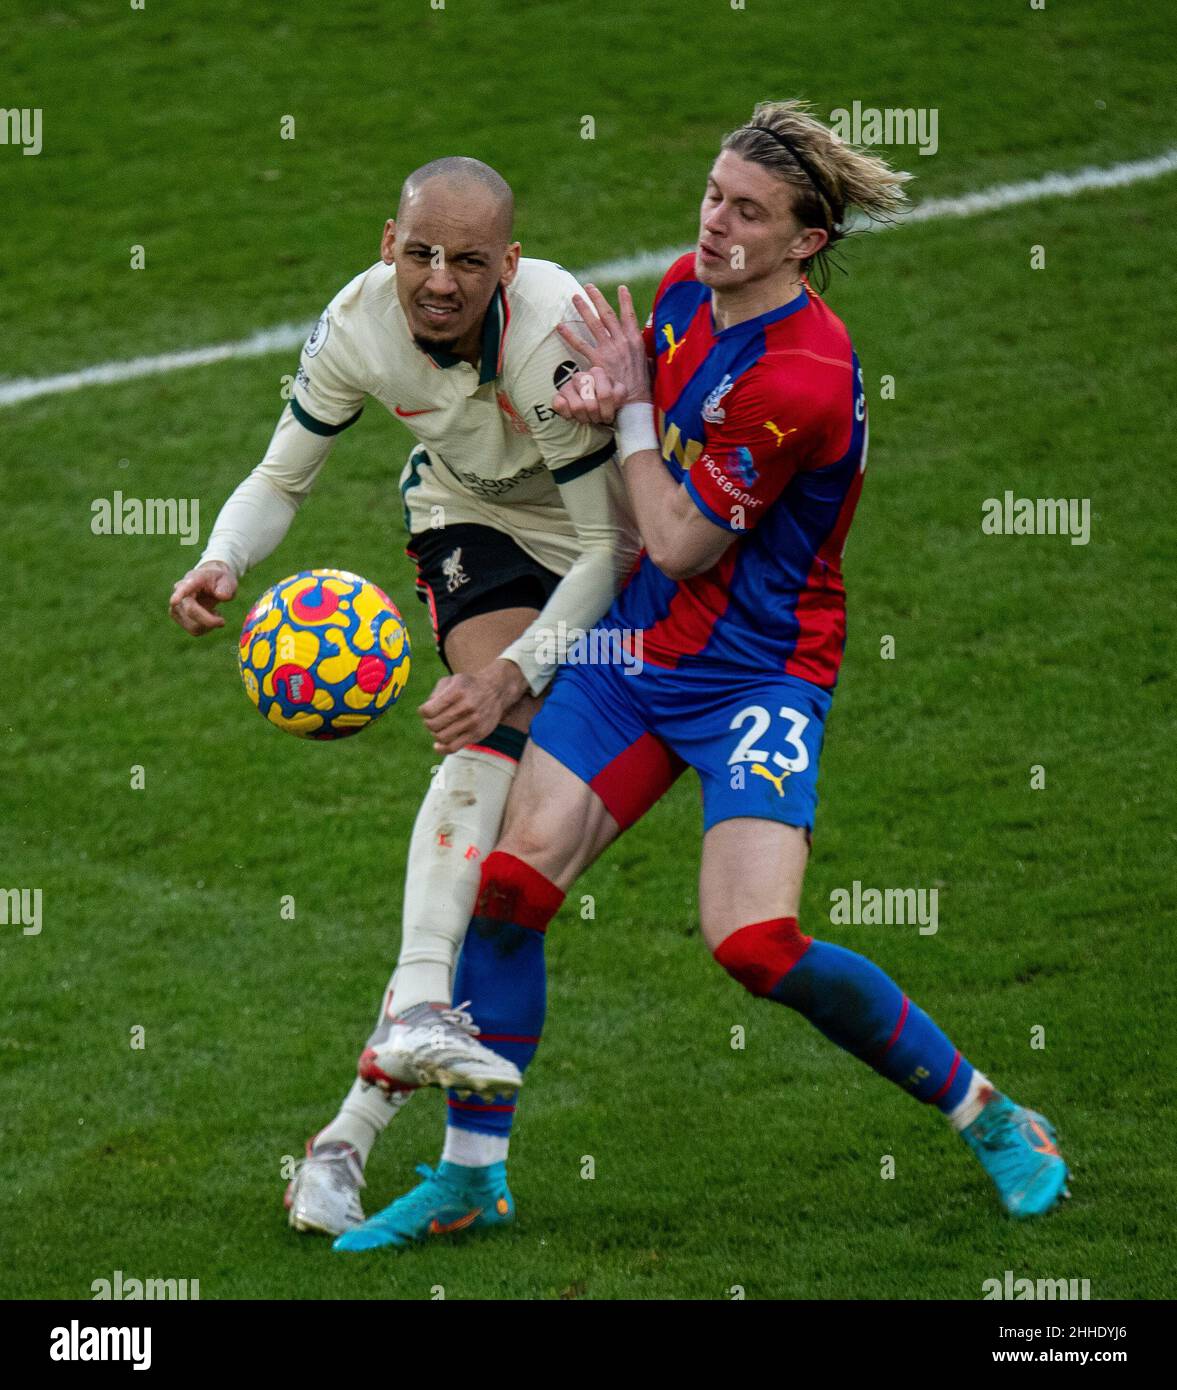 LONDON, ENGLAND - JANUARY 23: Fabinho, Conor Gallagher during the Premier League match between Crystal Palace and Liverpool at Selhurst Park on Januar Stock Photo